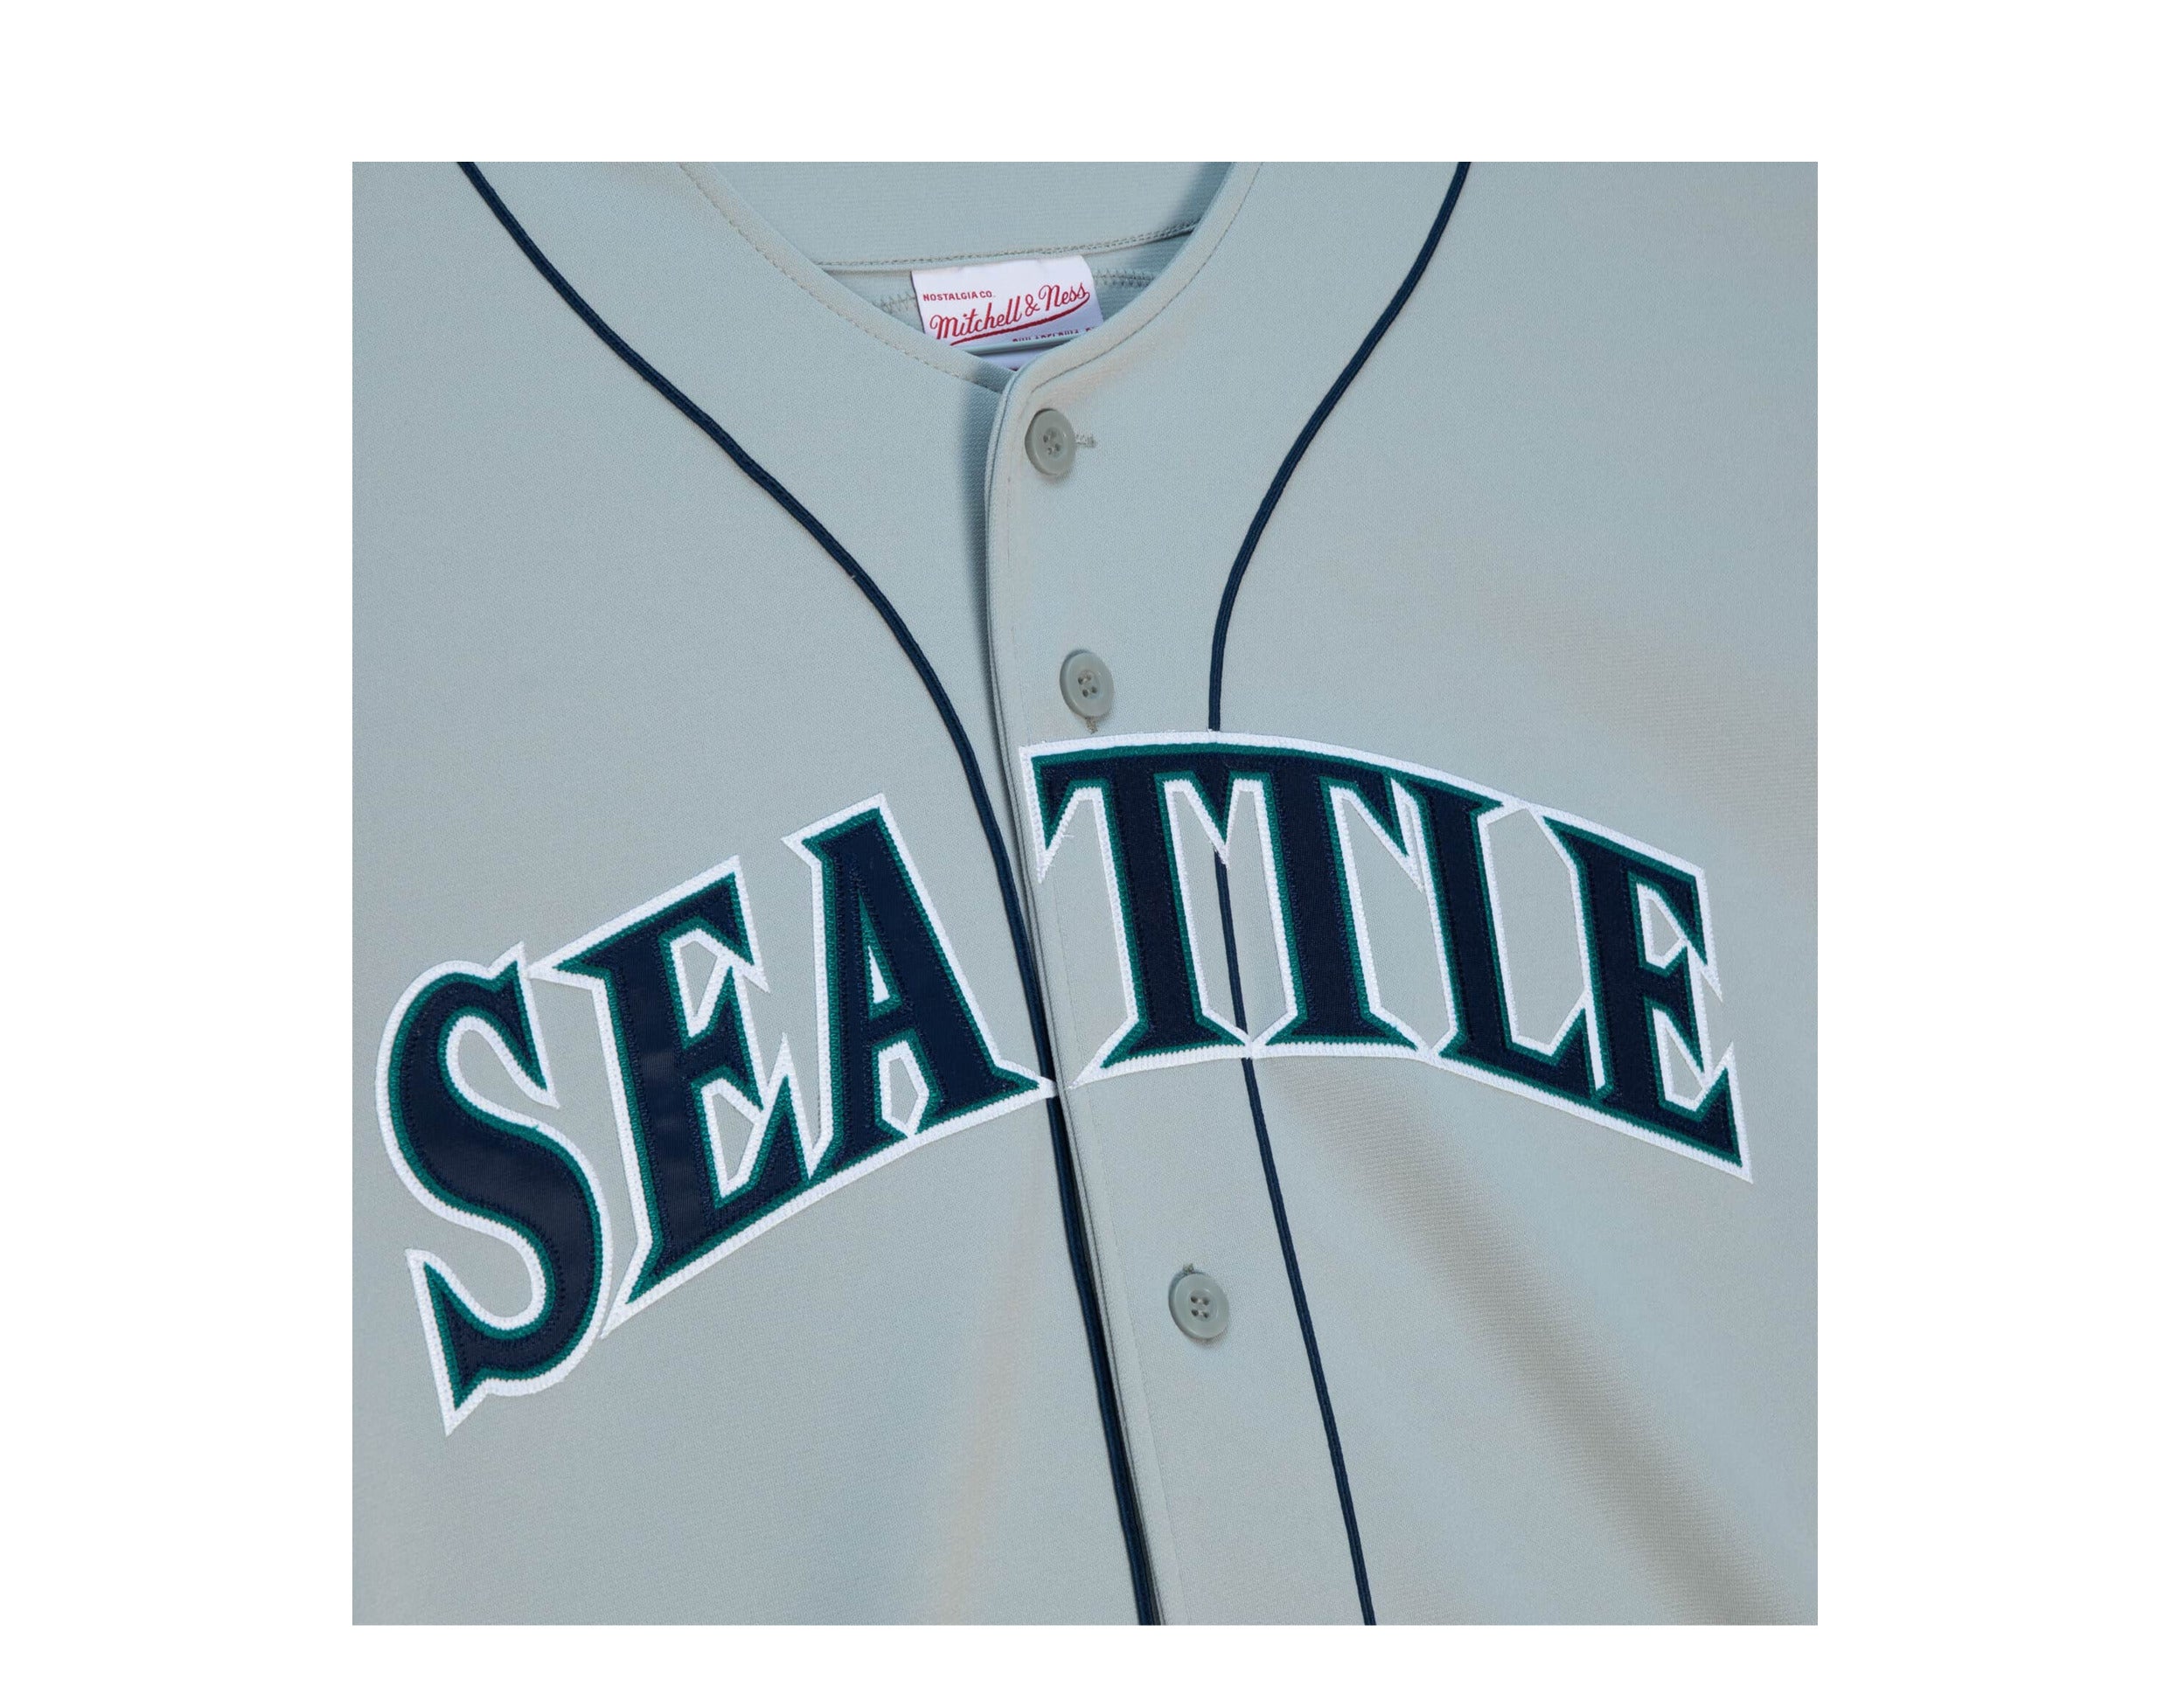 mitchell and ness seattle mariners